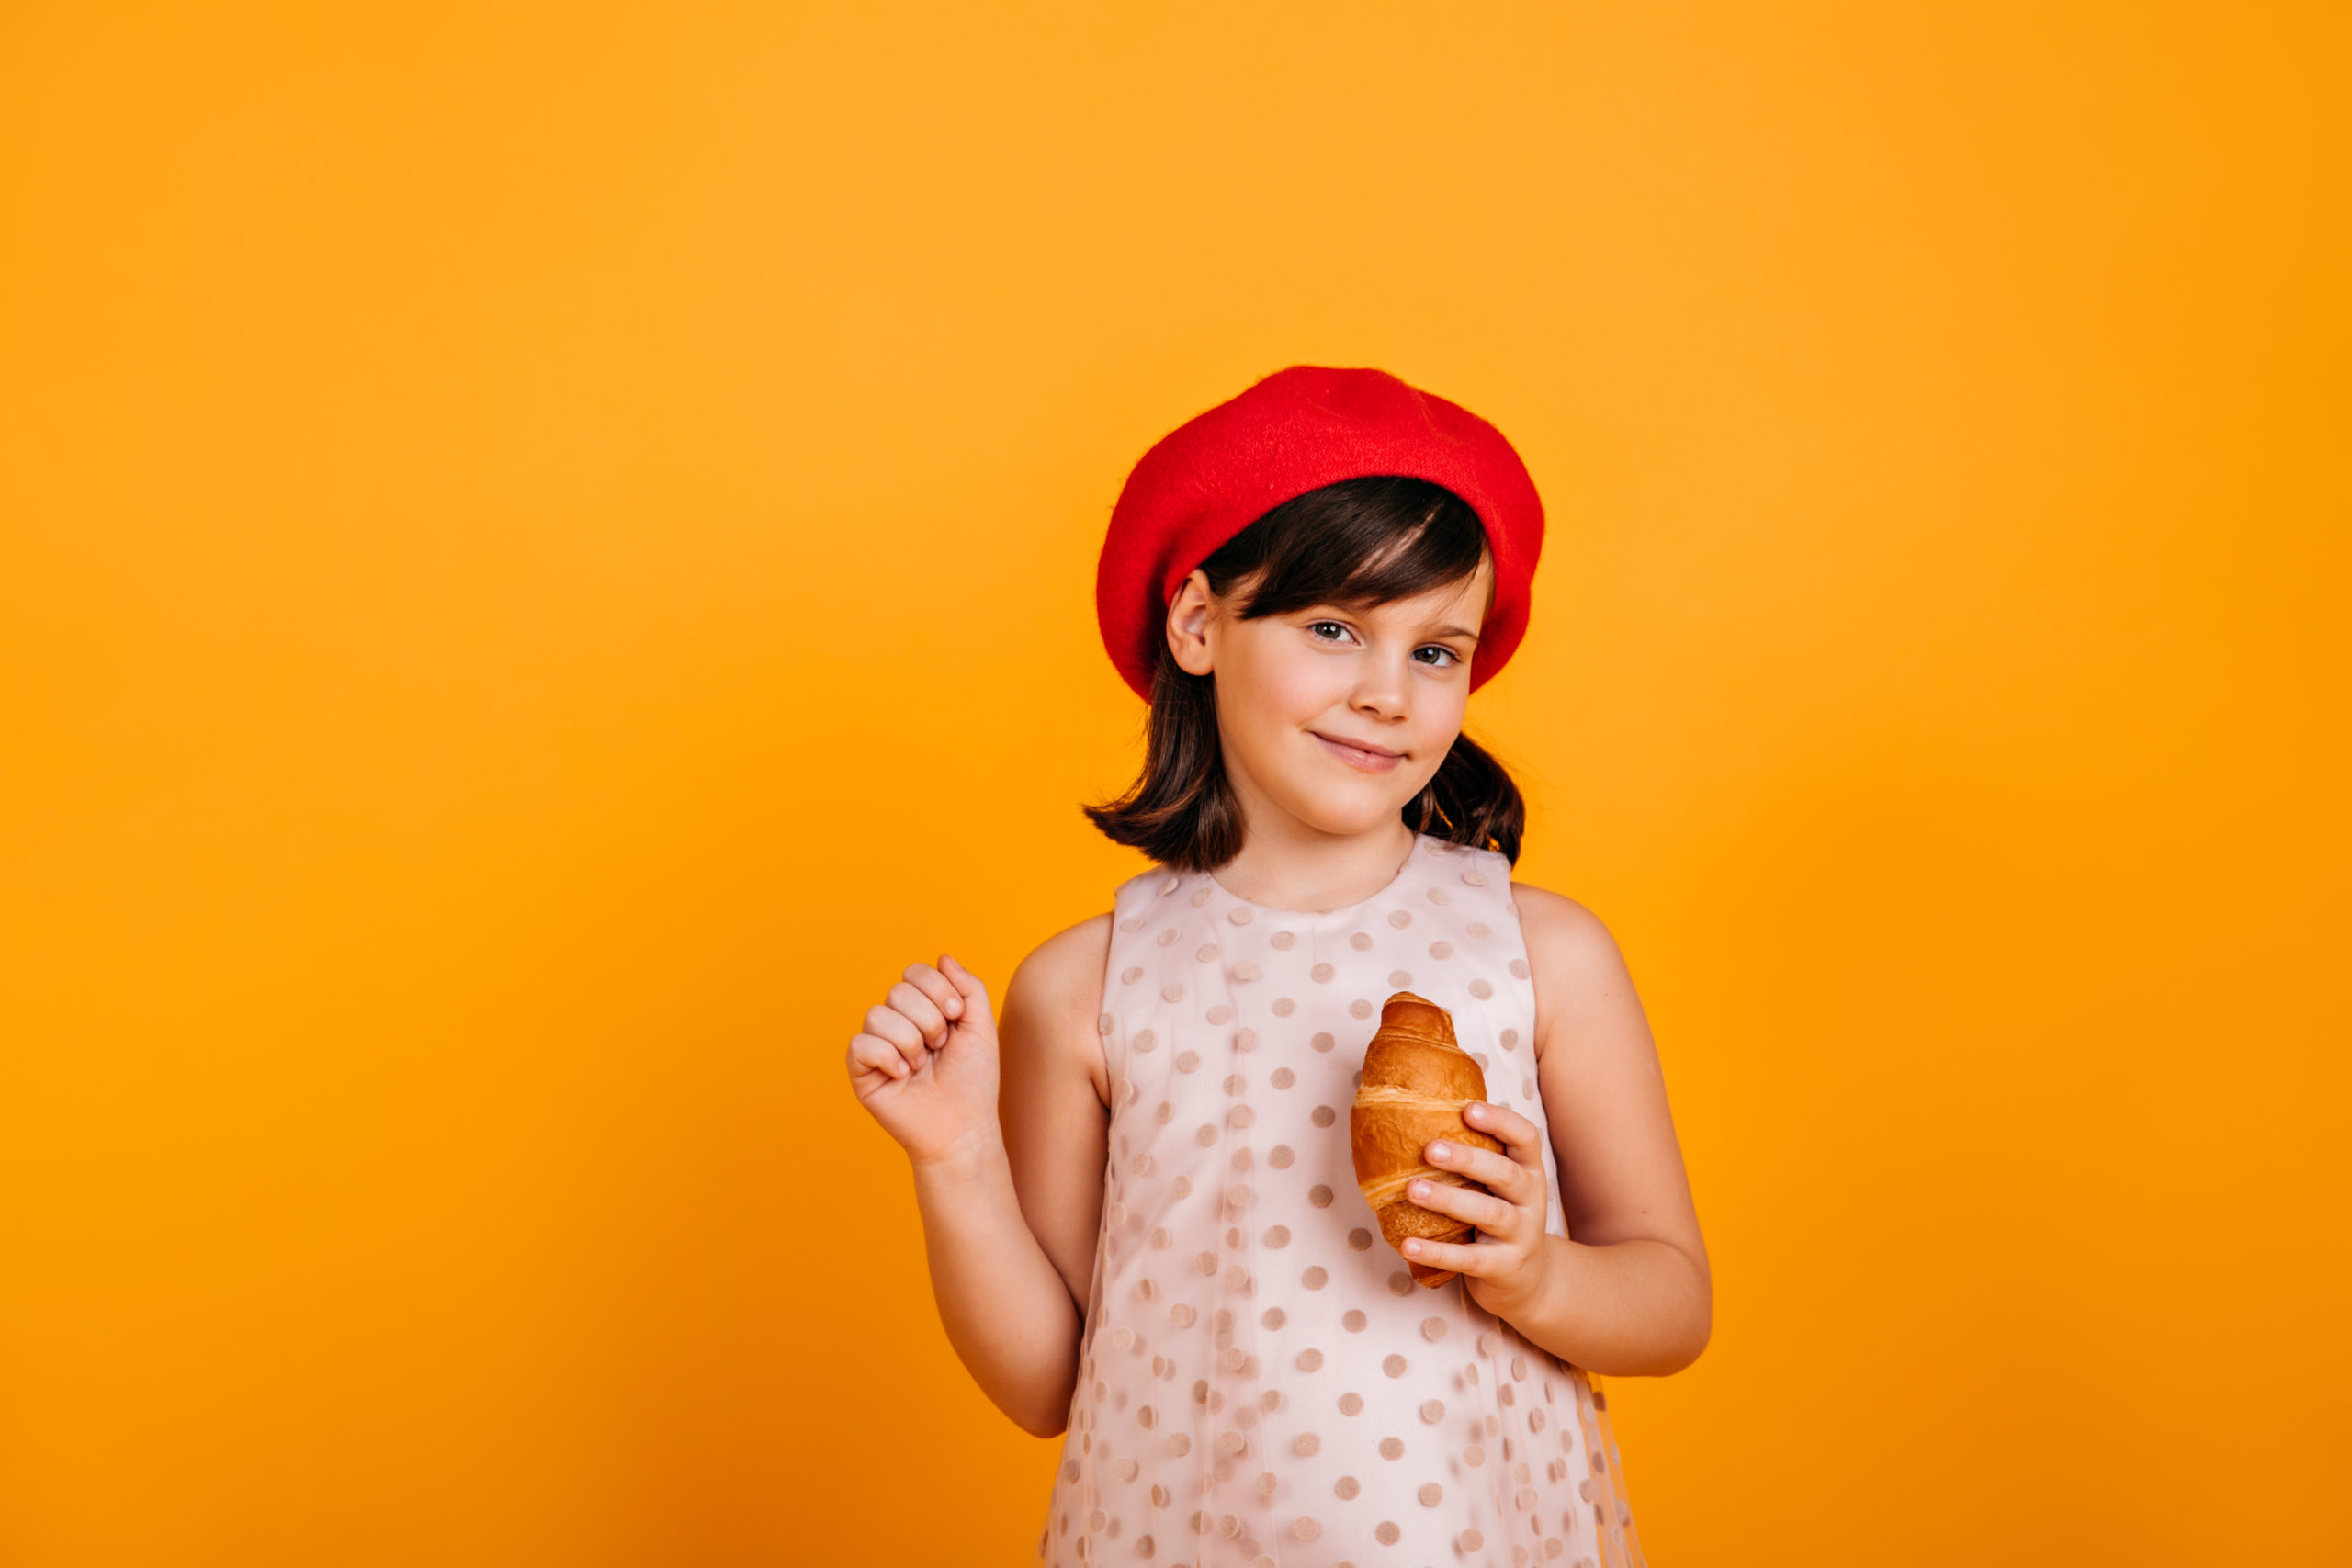 French little girl eating un croissant